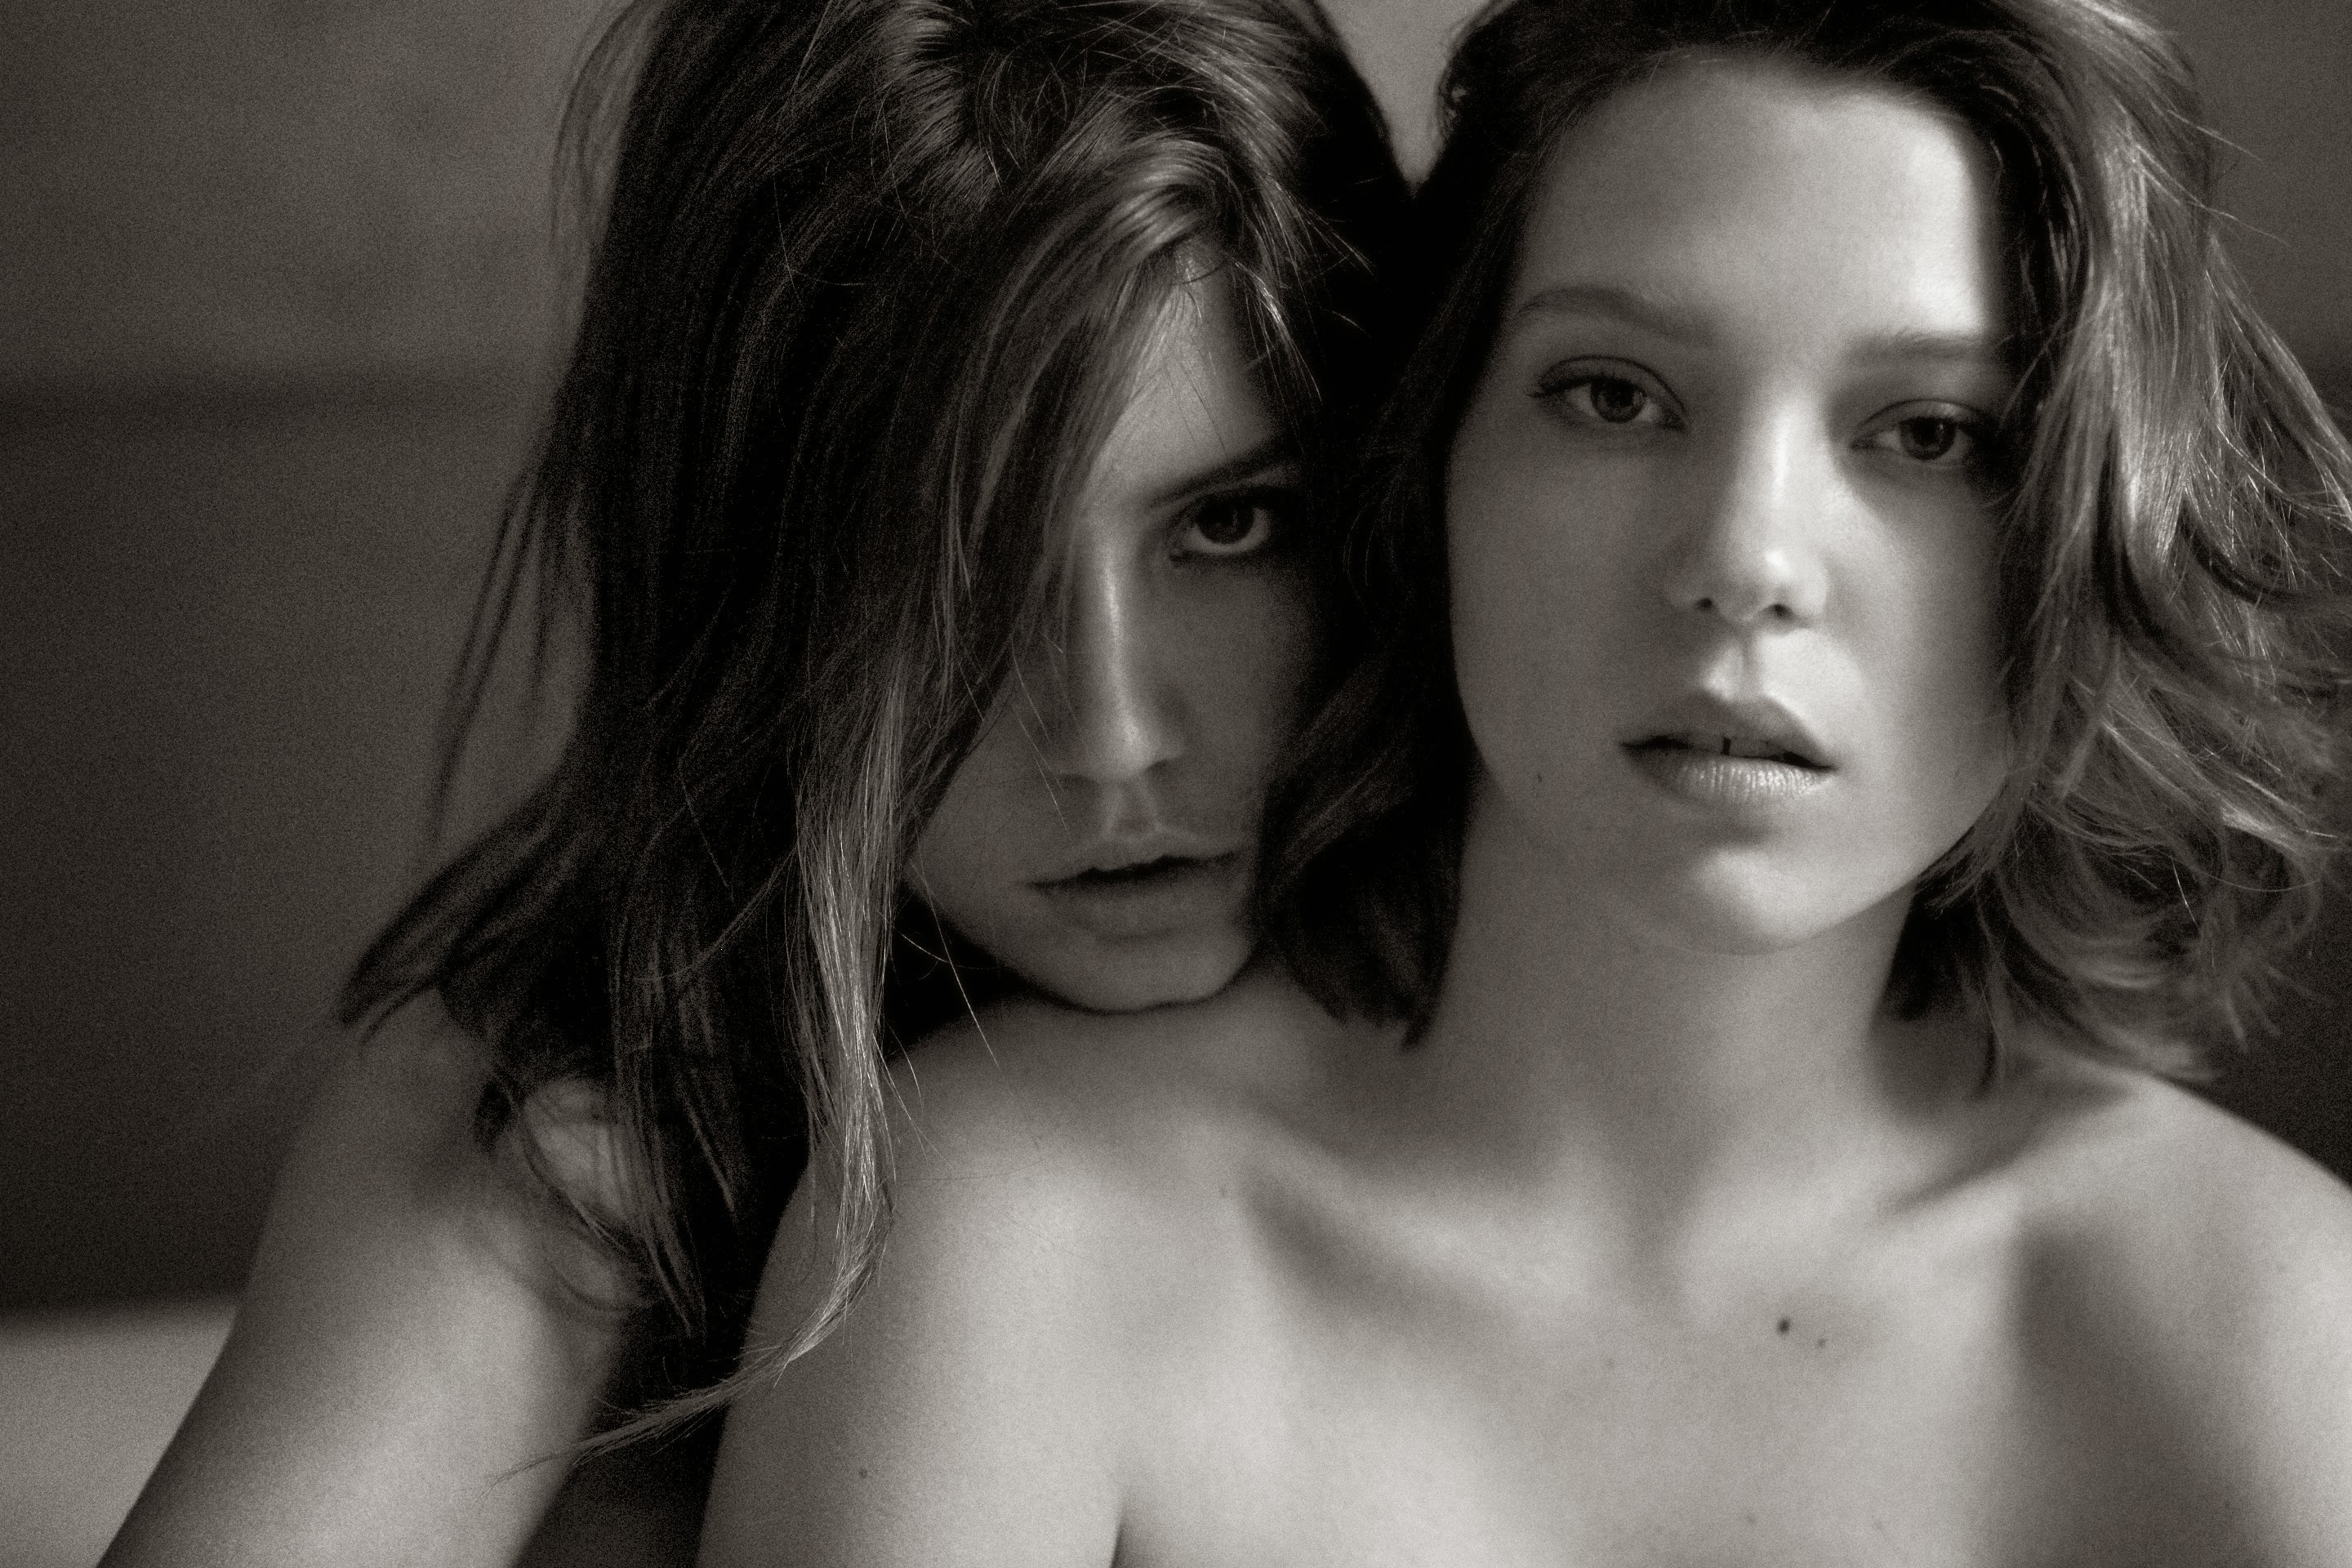 EXPOSTAS.com_L____a_Seydoux___Ad____le_Exarchopoulos_Photoshoot_by_Mikael_Jansson_for_Interview_November_2013_07_.jpg